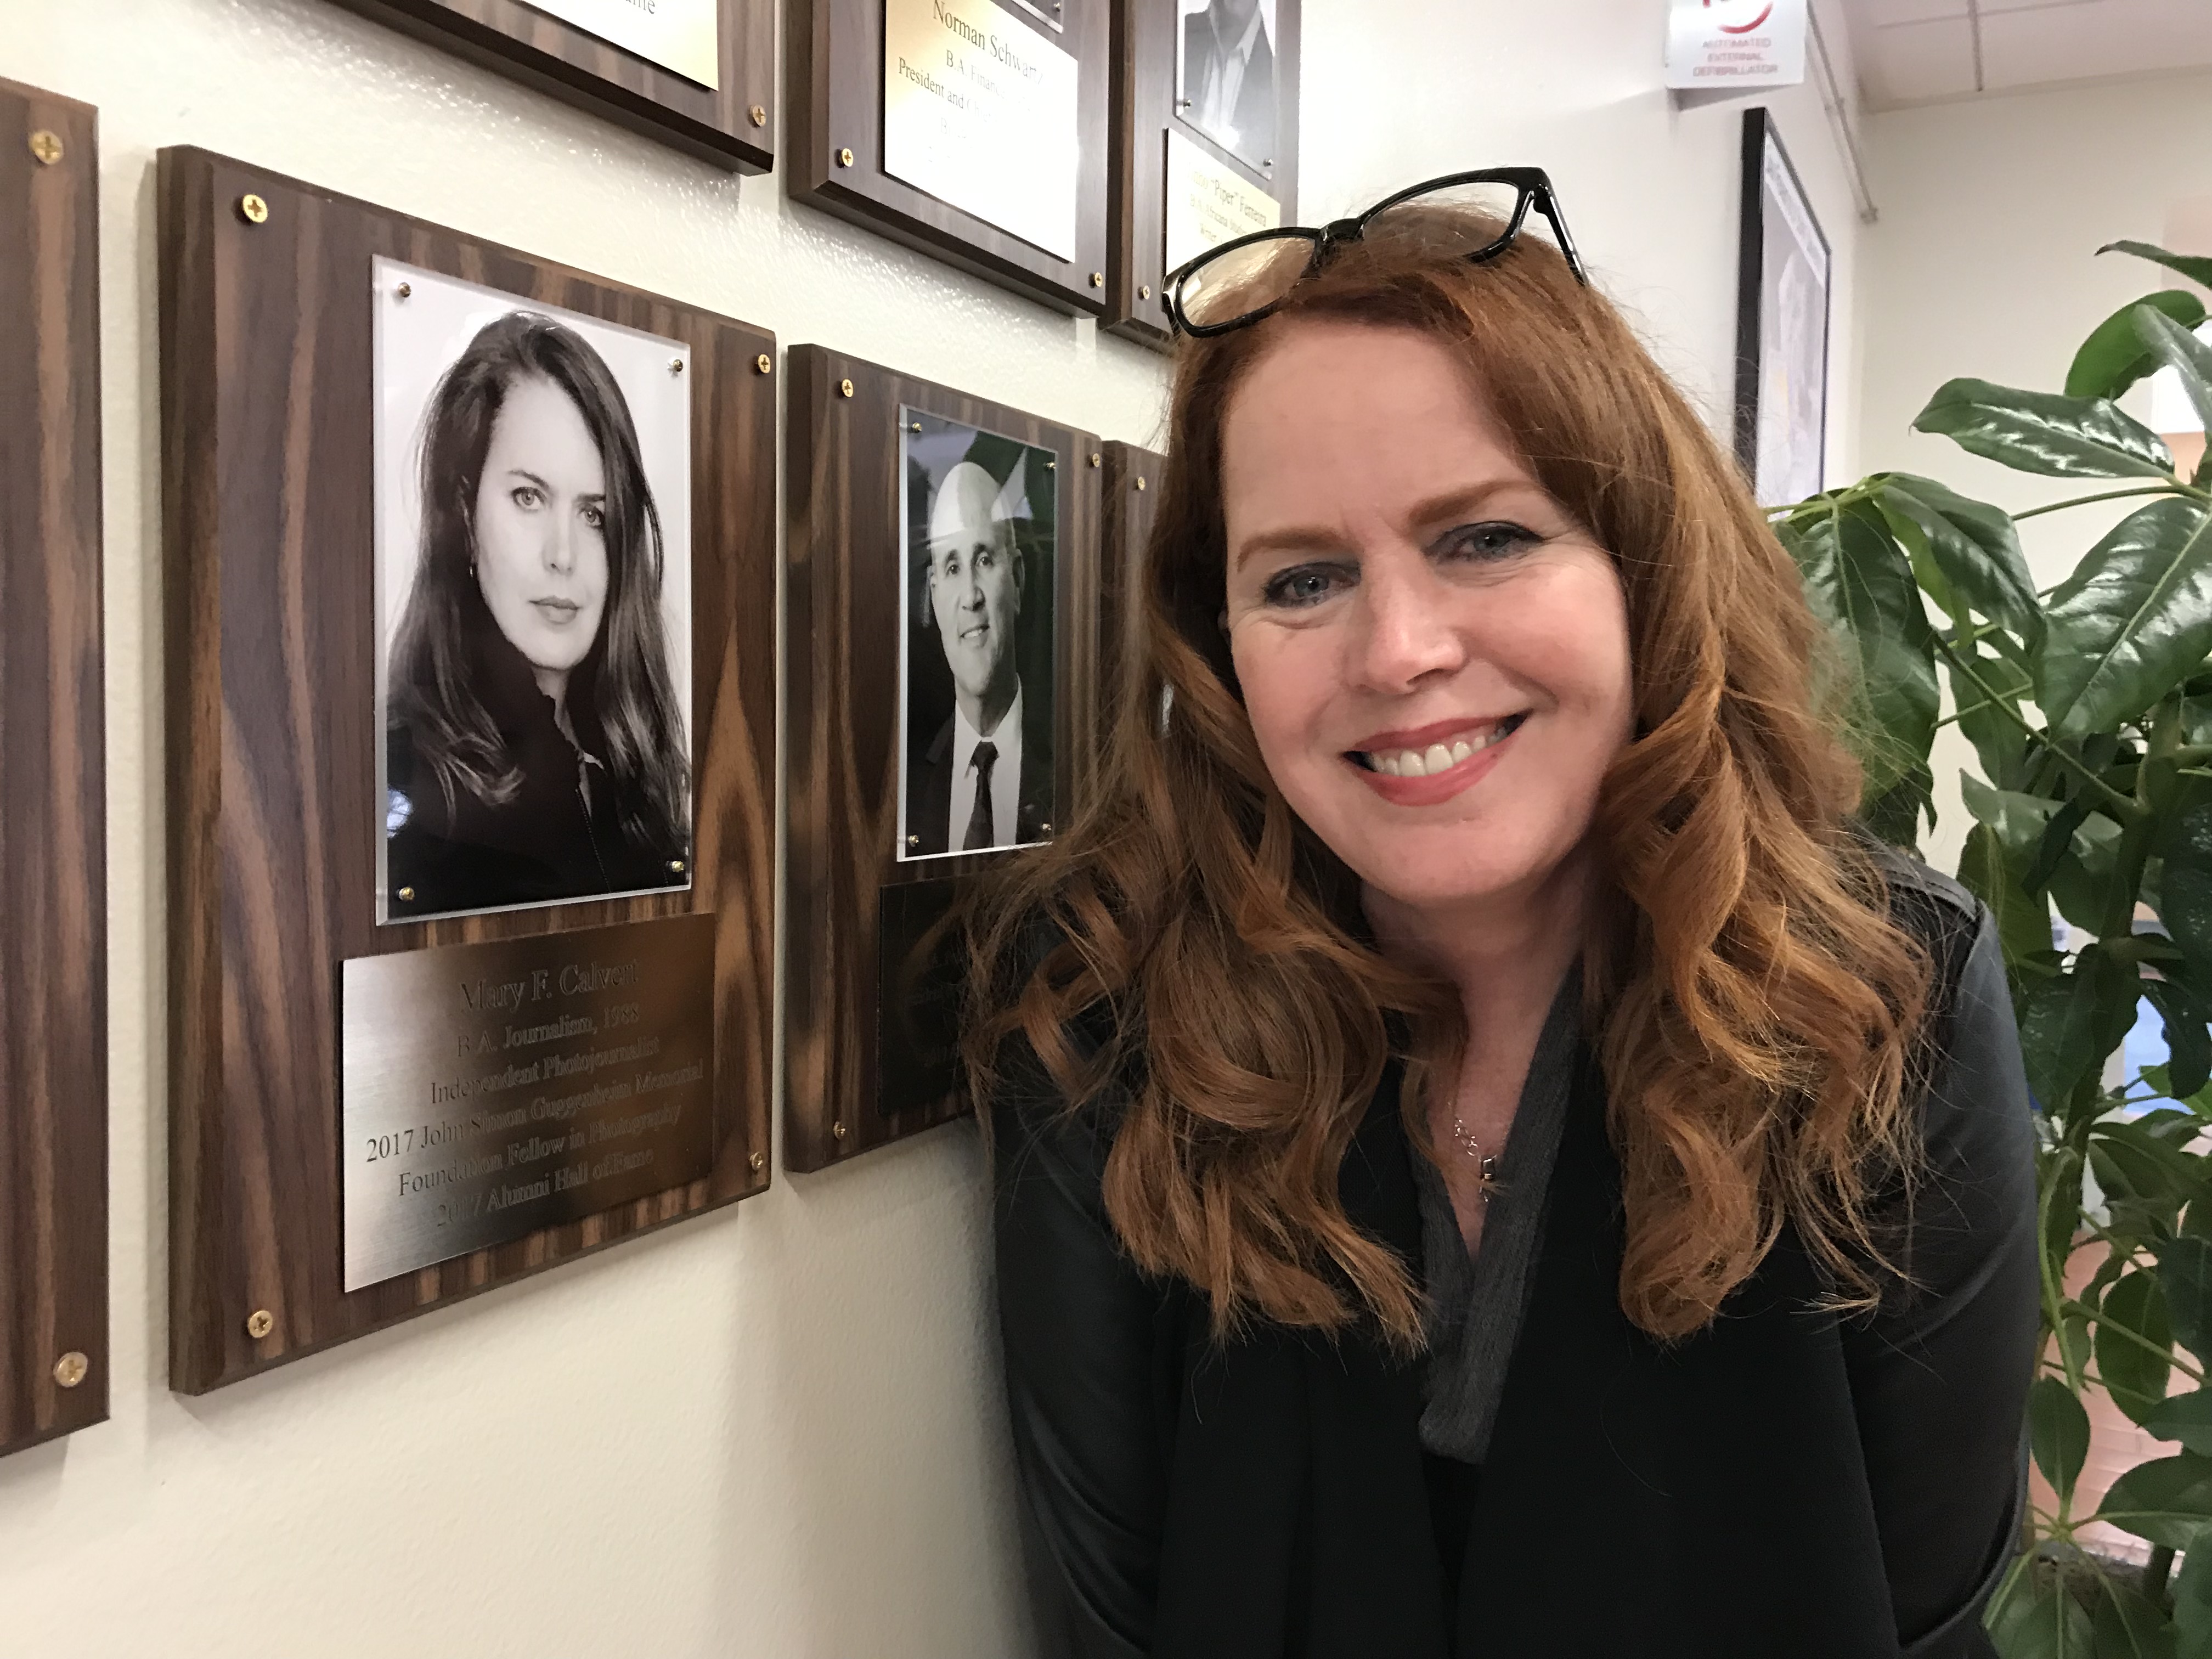 Mary Calvert stands by her photo in the Administration Building during a visit to campus in April 2019